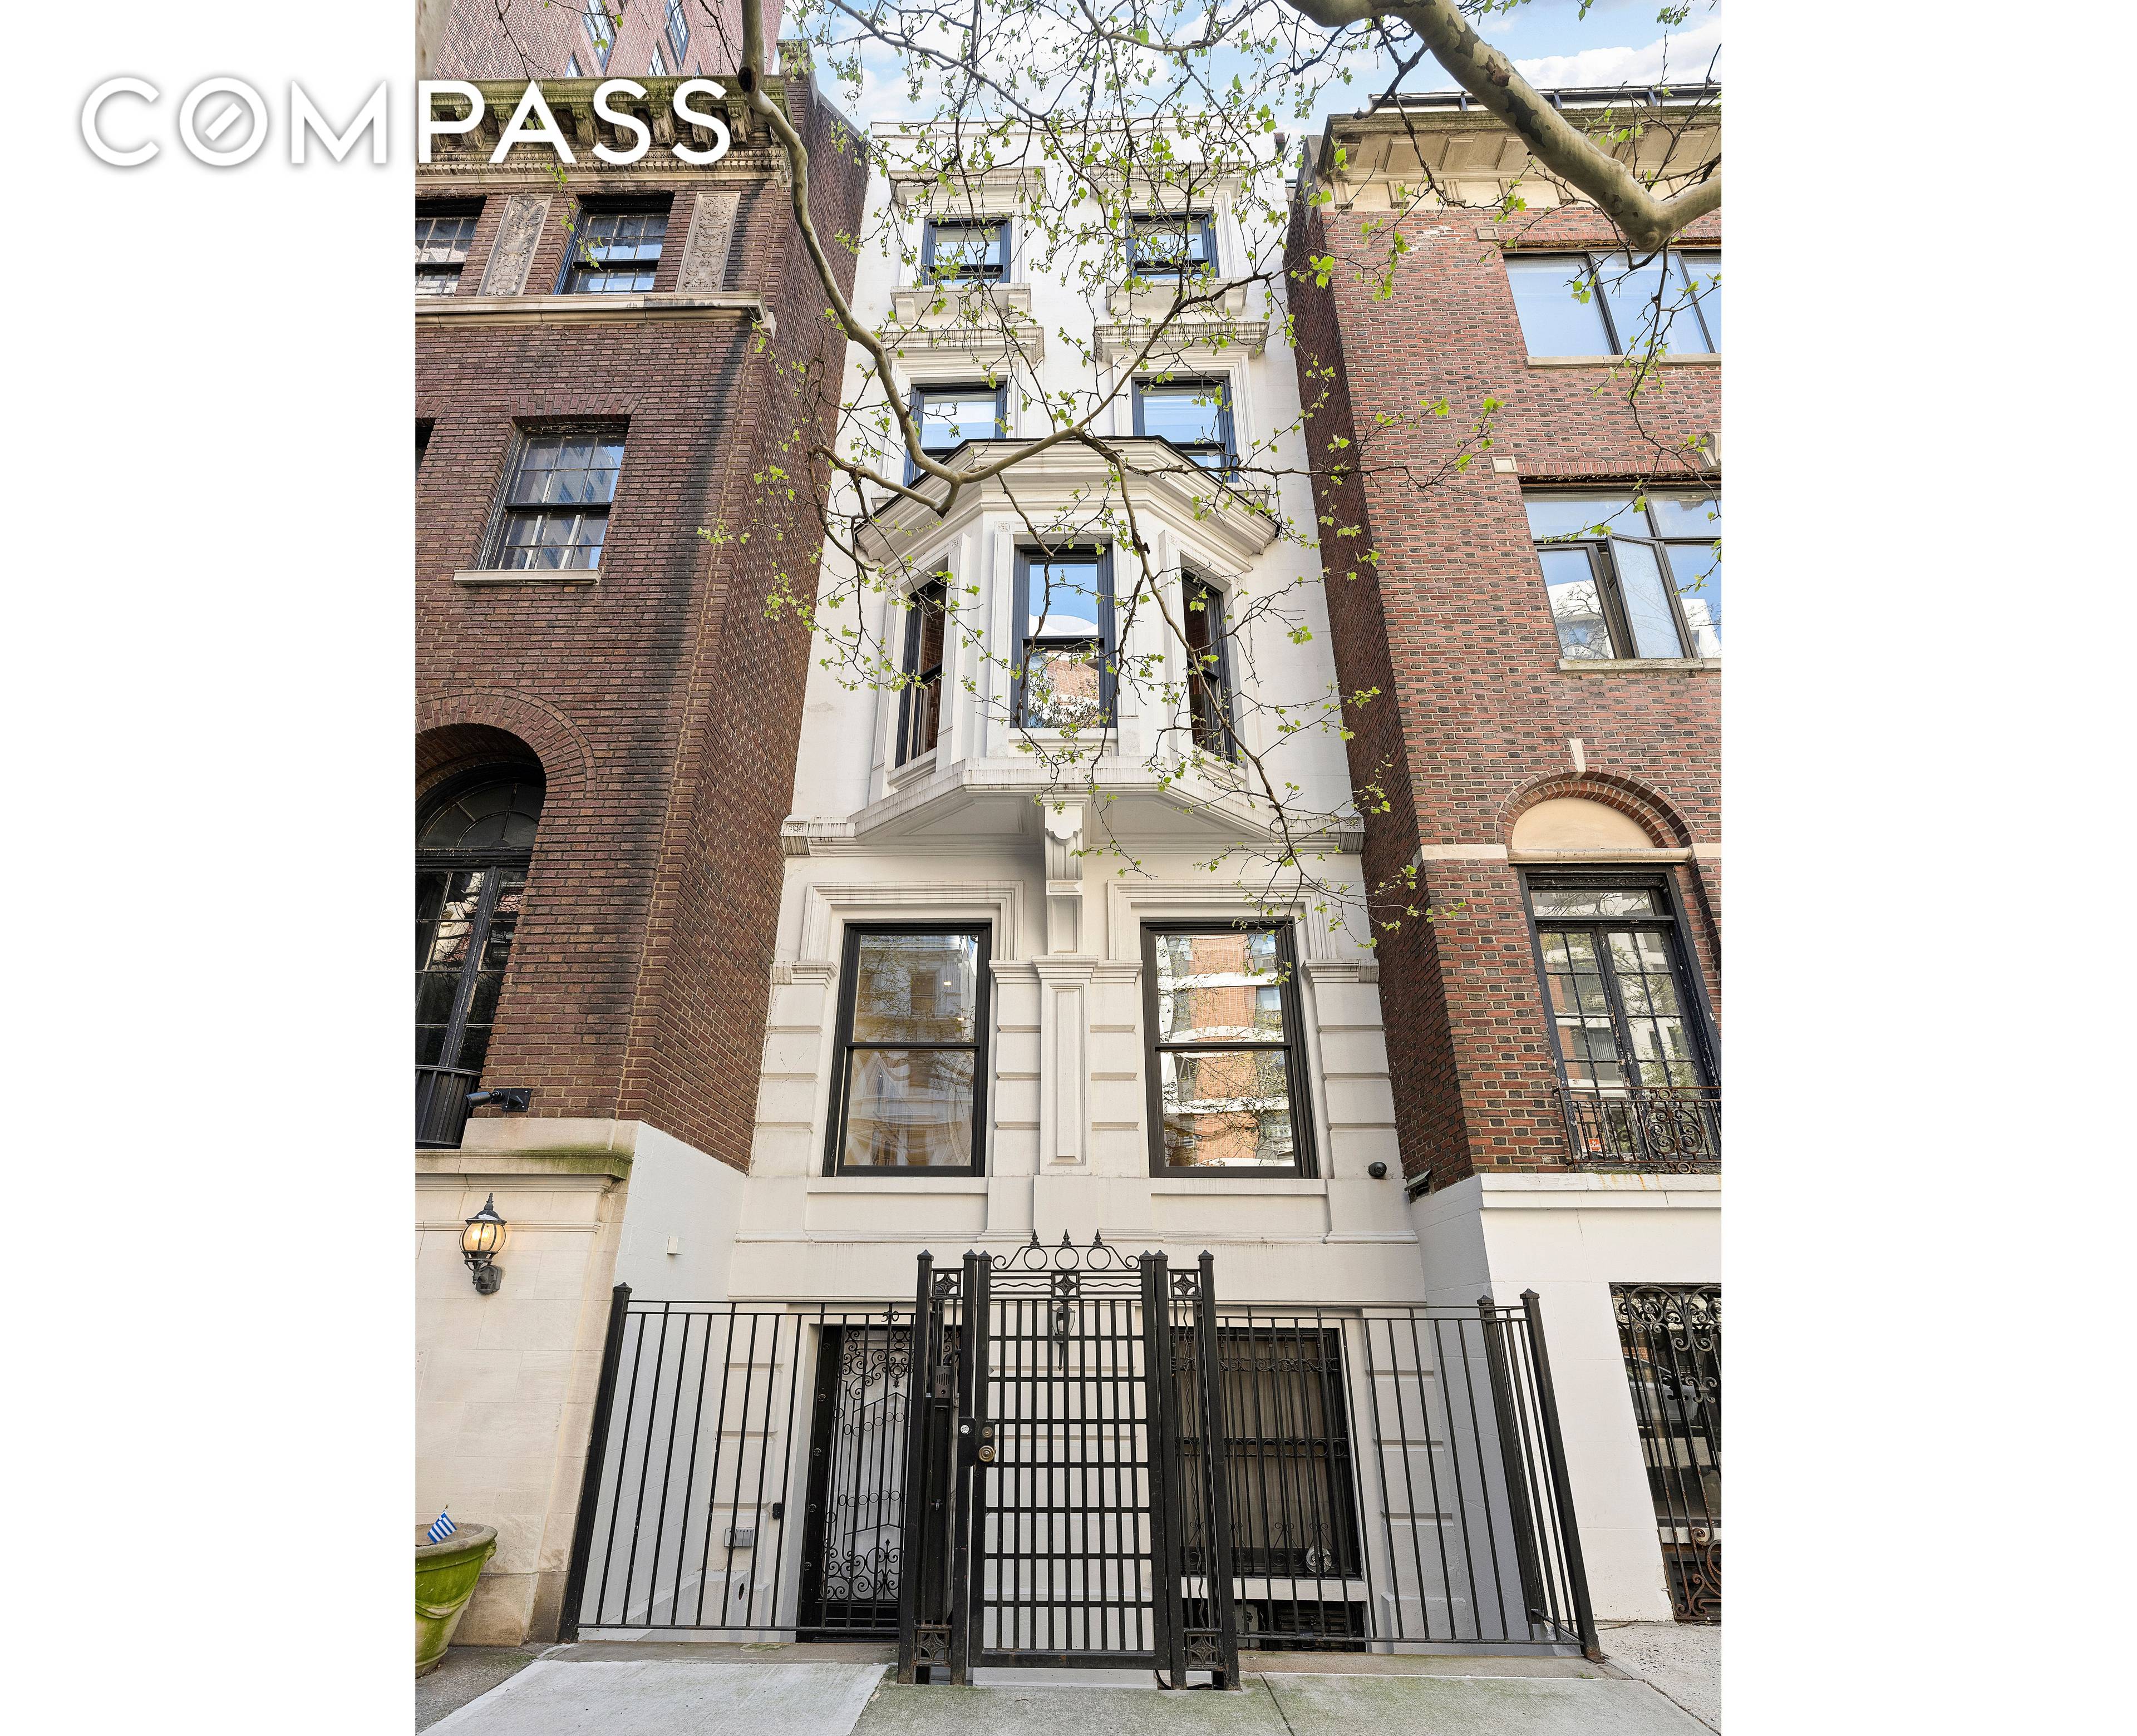 Situated just a block from Central Park, 50 East 73rd Street is an immaculate home awaiting its new owner.